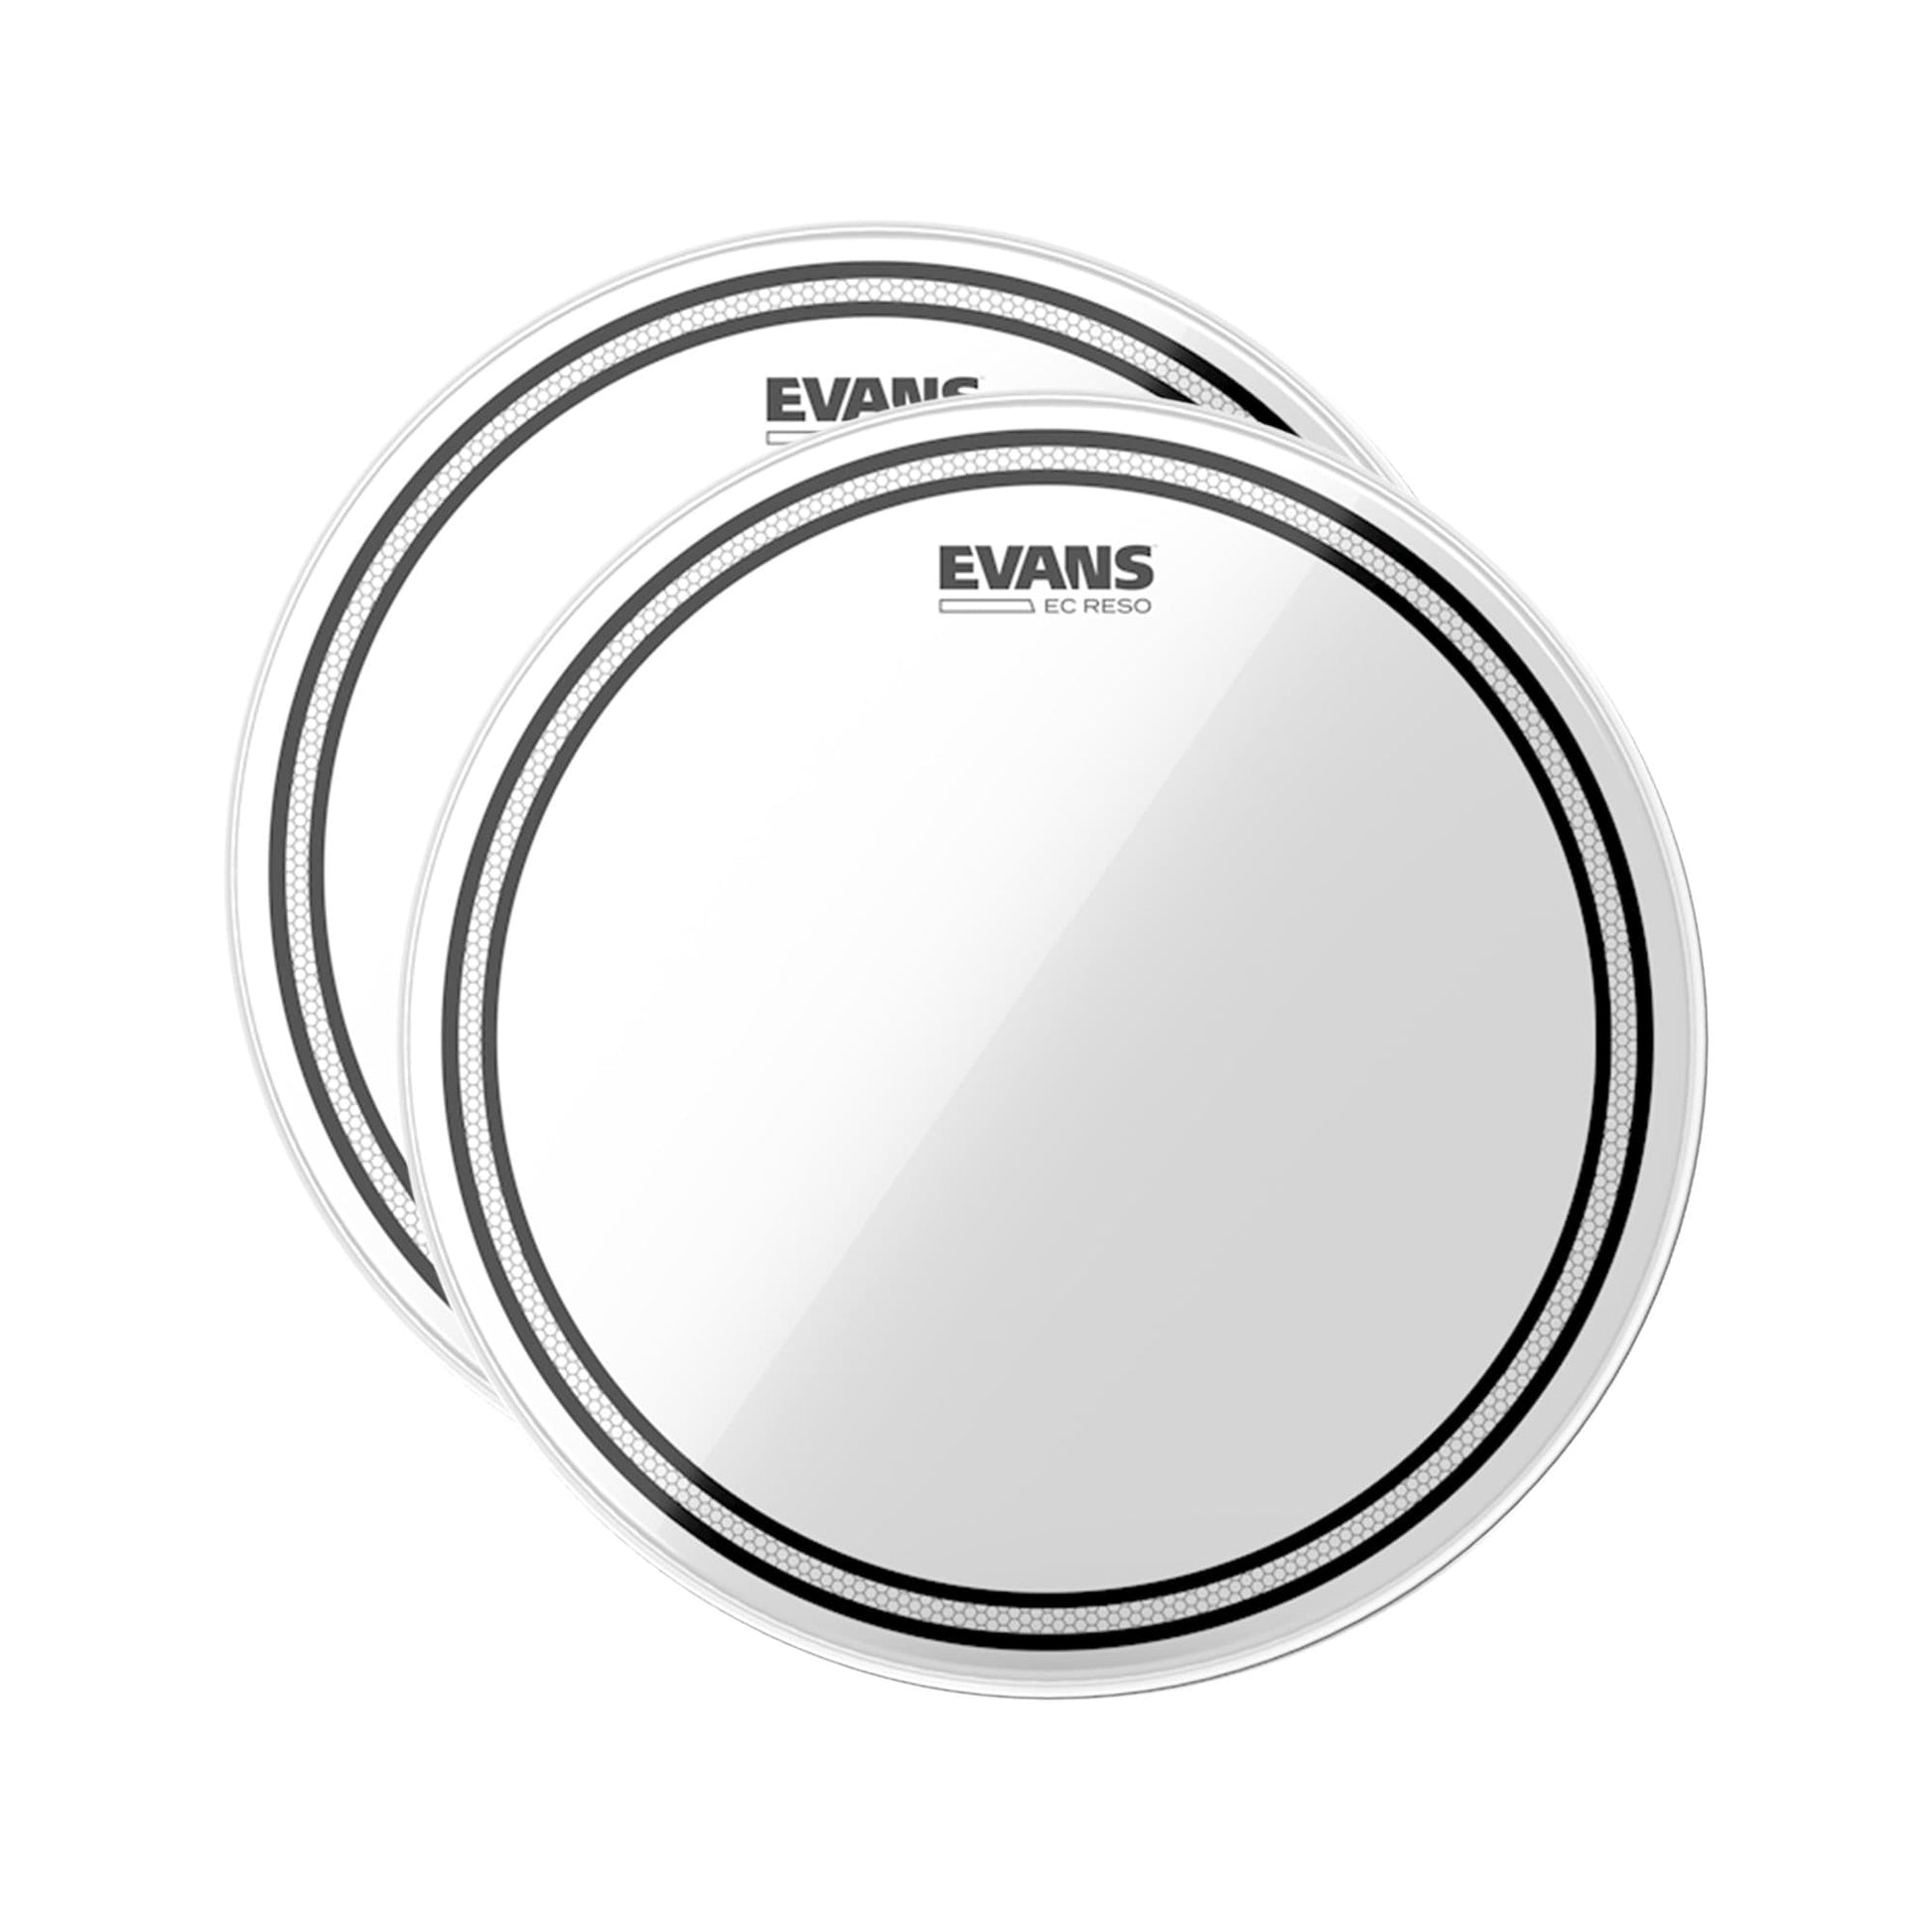 Evans 16" EC Resonant Tom Drum Head (2 Pack Bundle) Drums and Percussion / Parts and Accessories / Heads